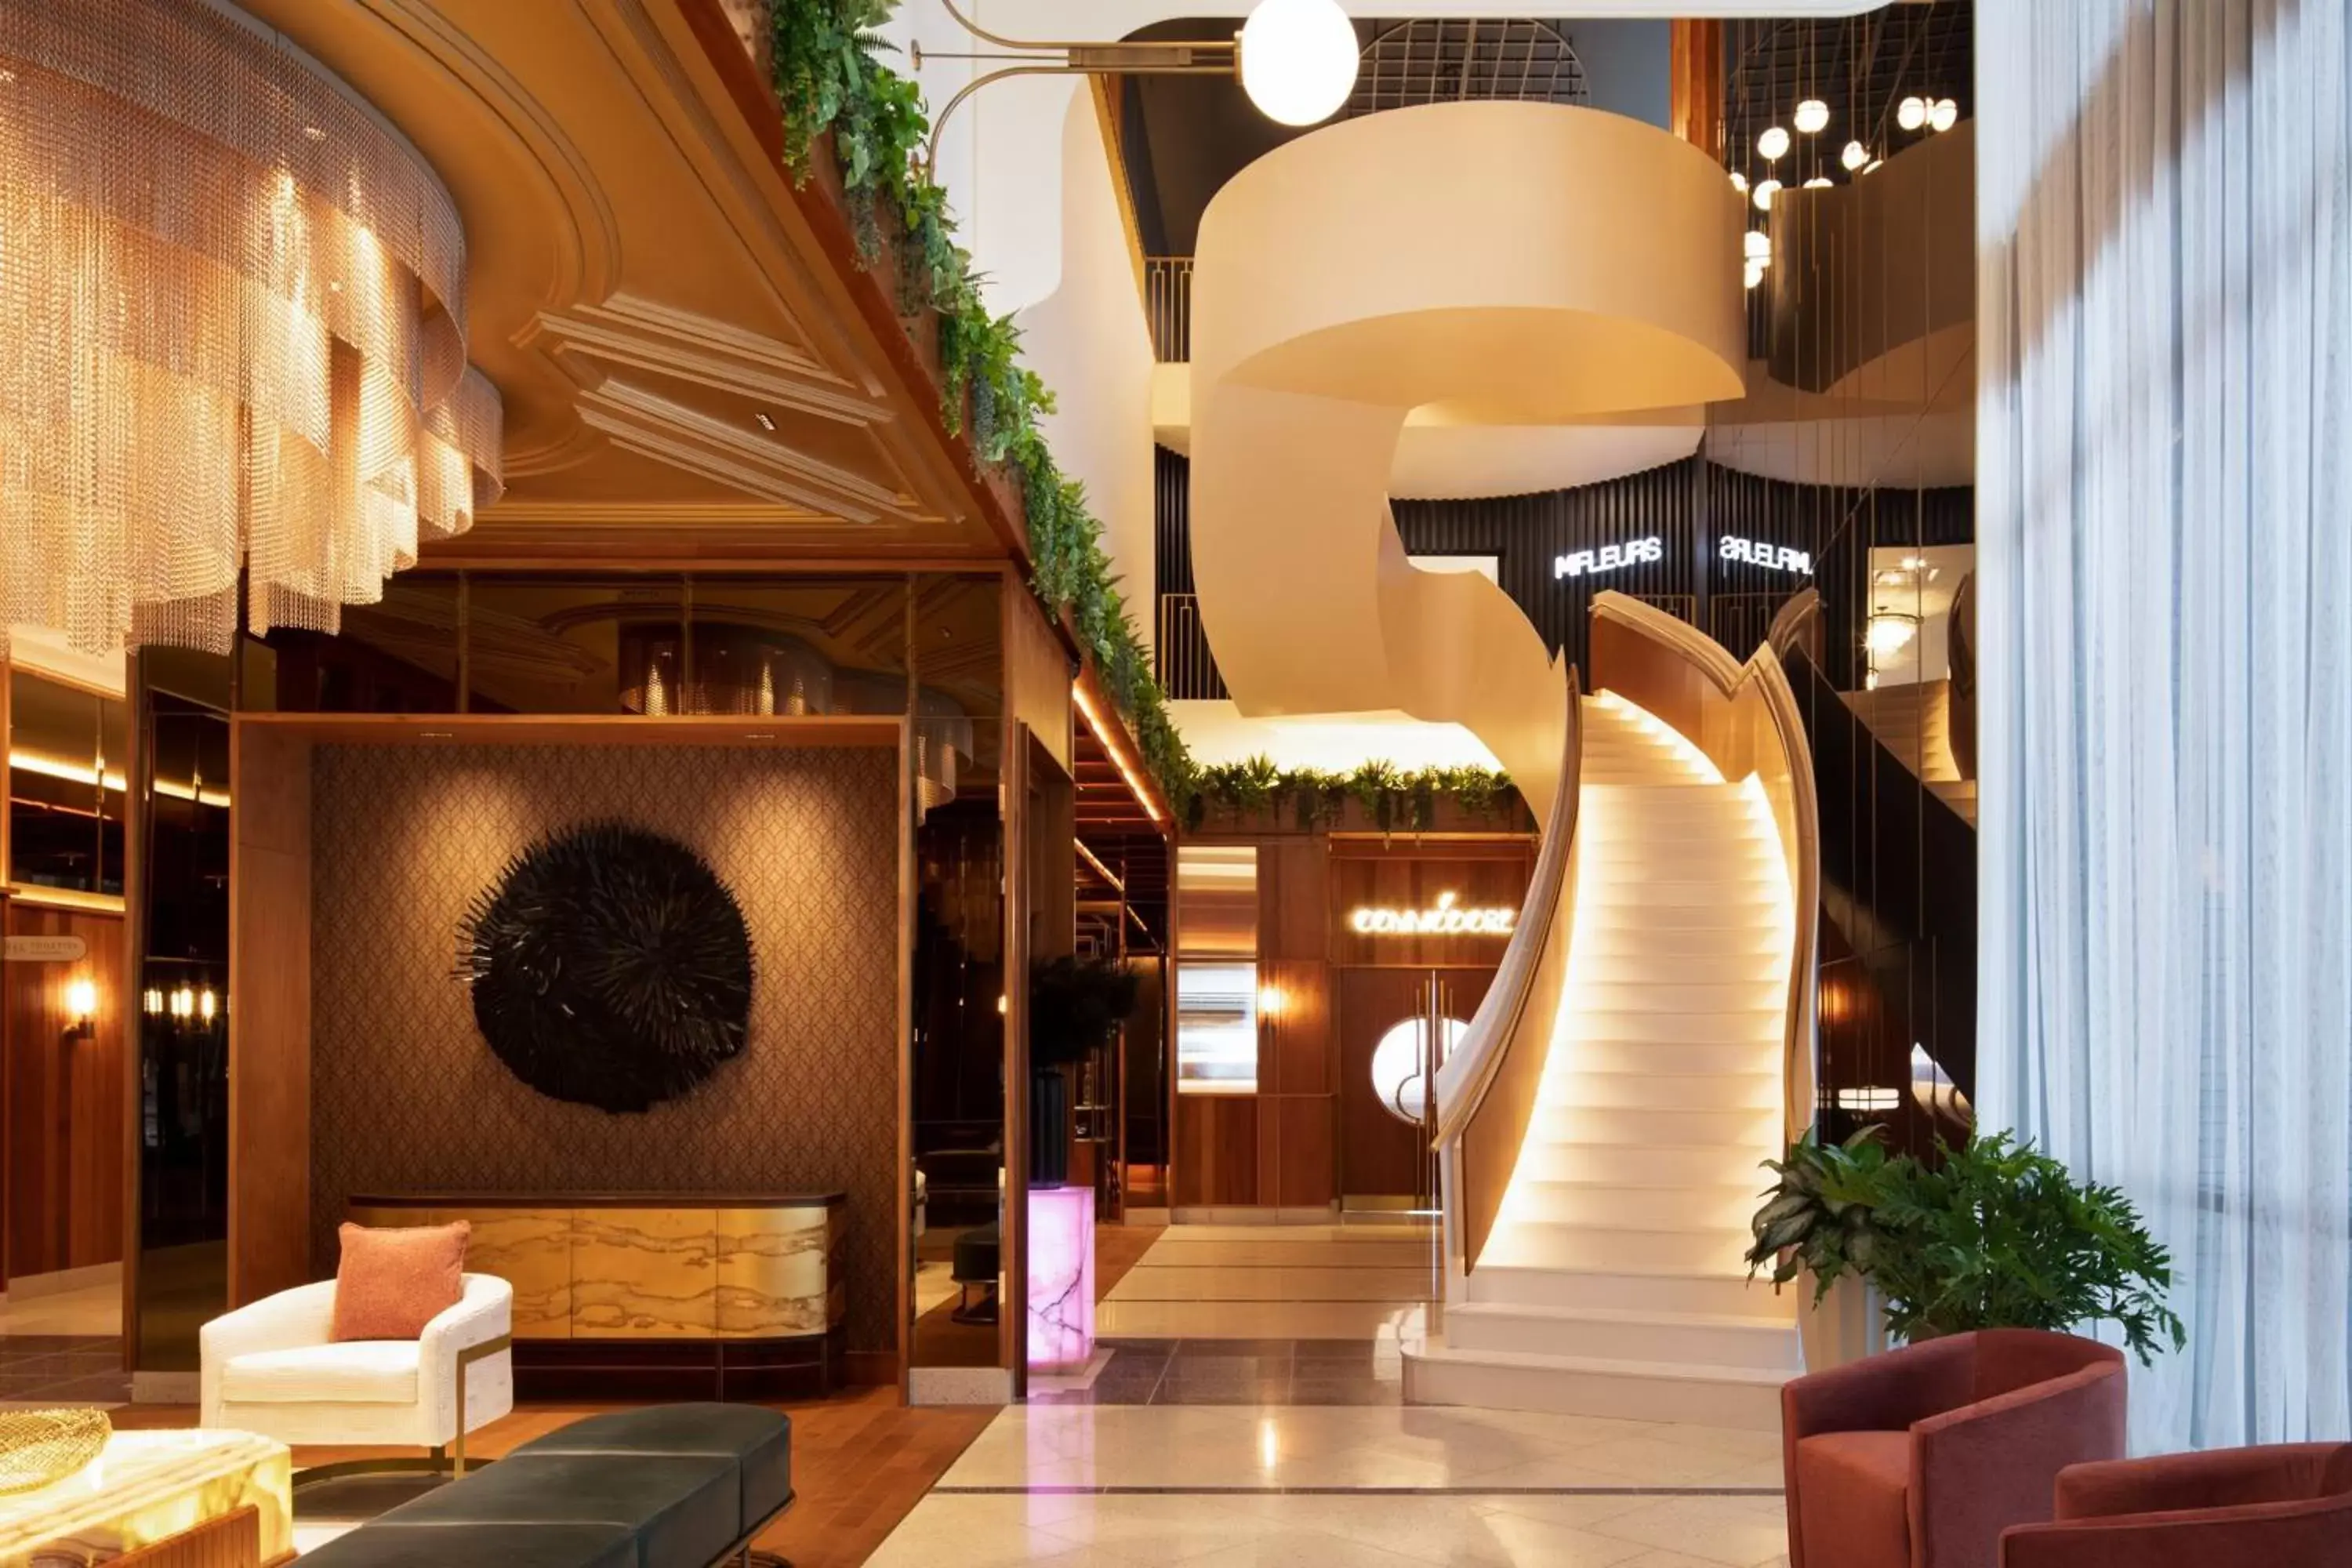 Lobby or reception in HONEYROSE Hotel, Montreal, a Tribute Portfolio Hotel